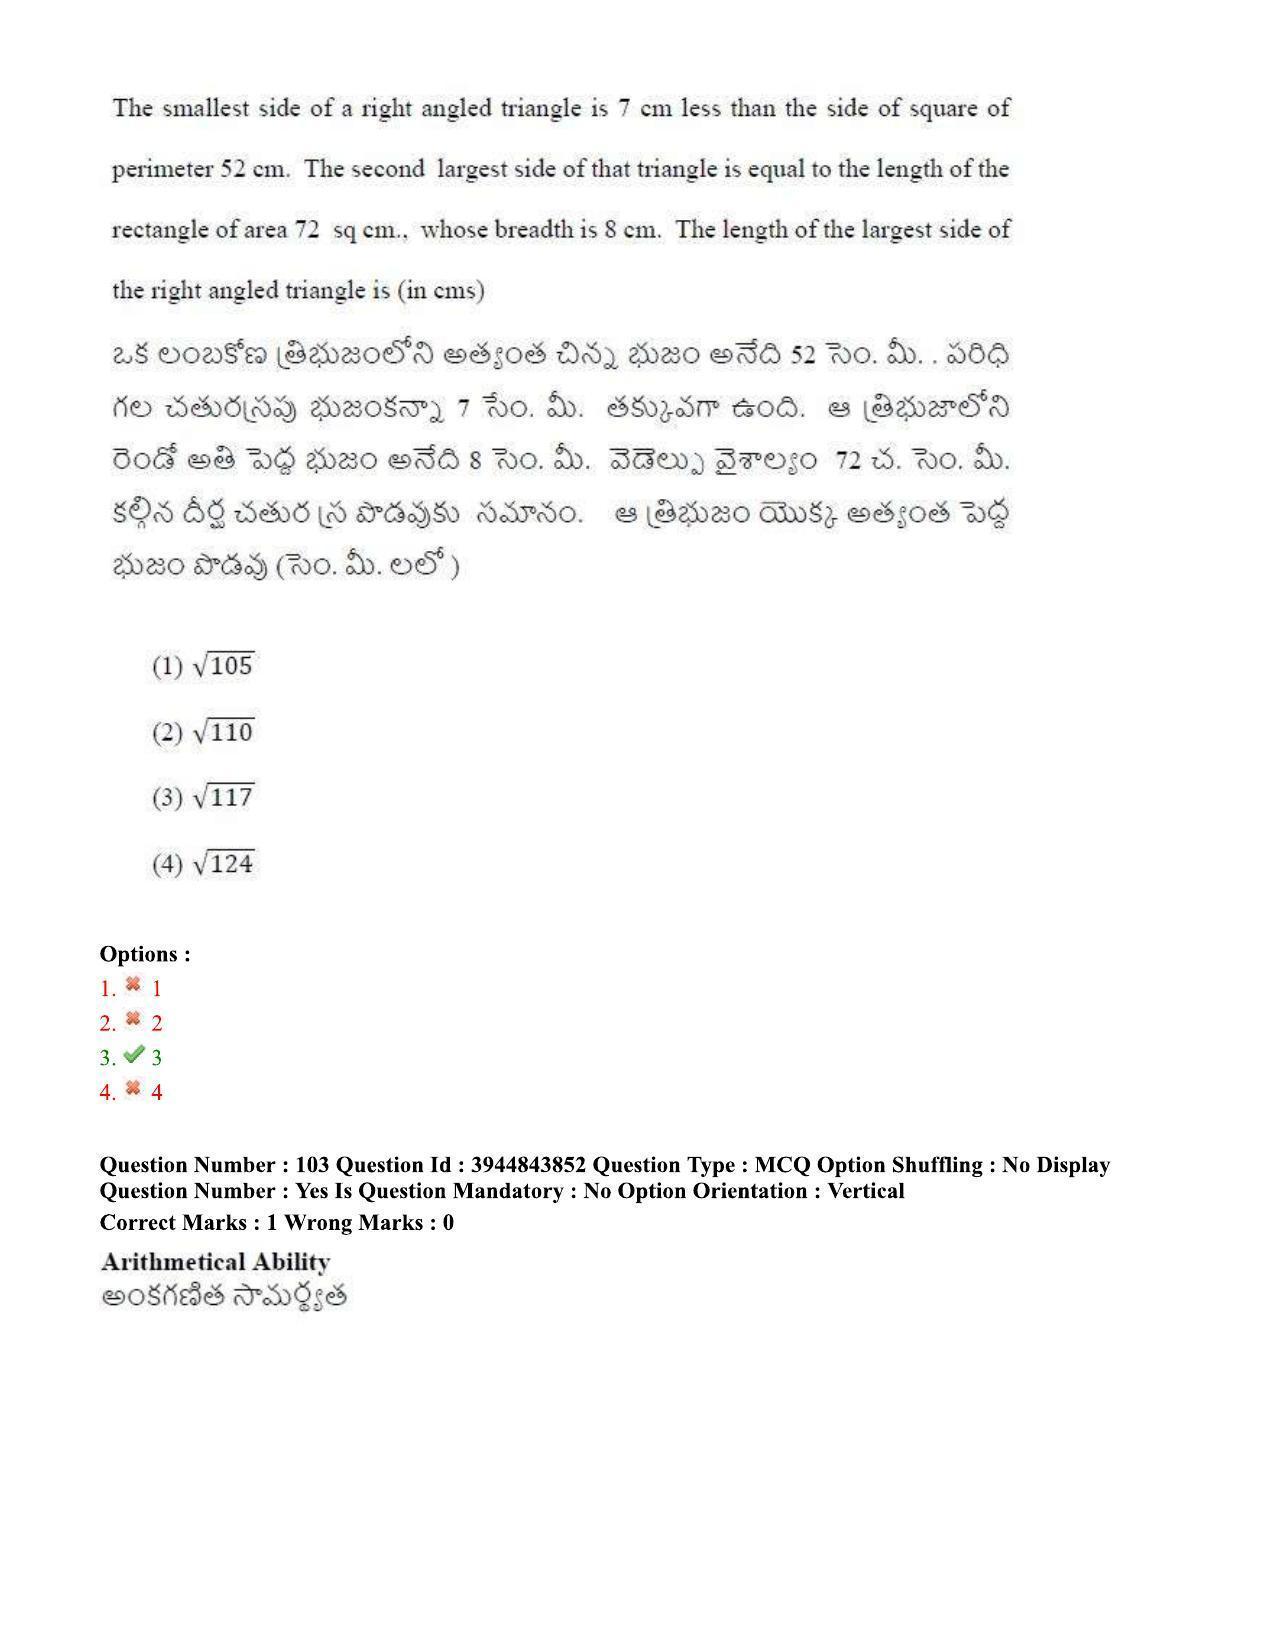 TS ICET 2020 Question Paper 1 - Oct 1, 2020	 - Page 80